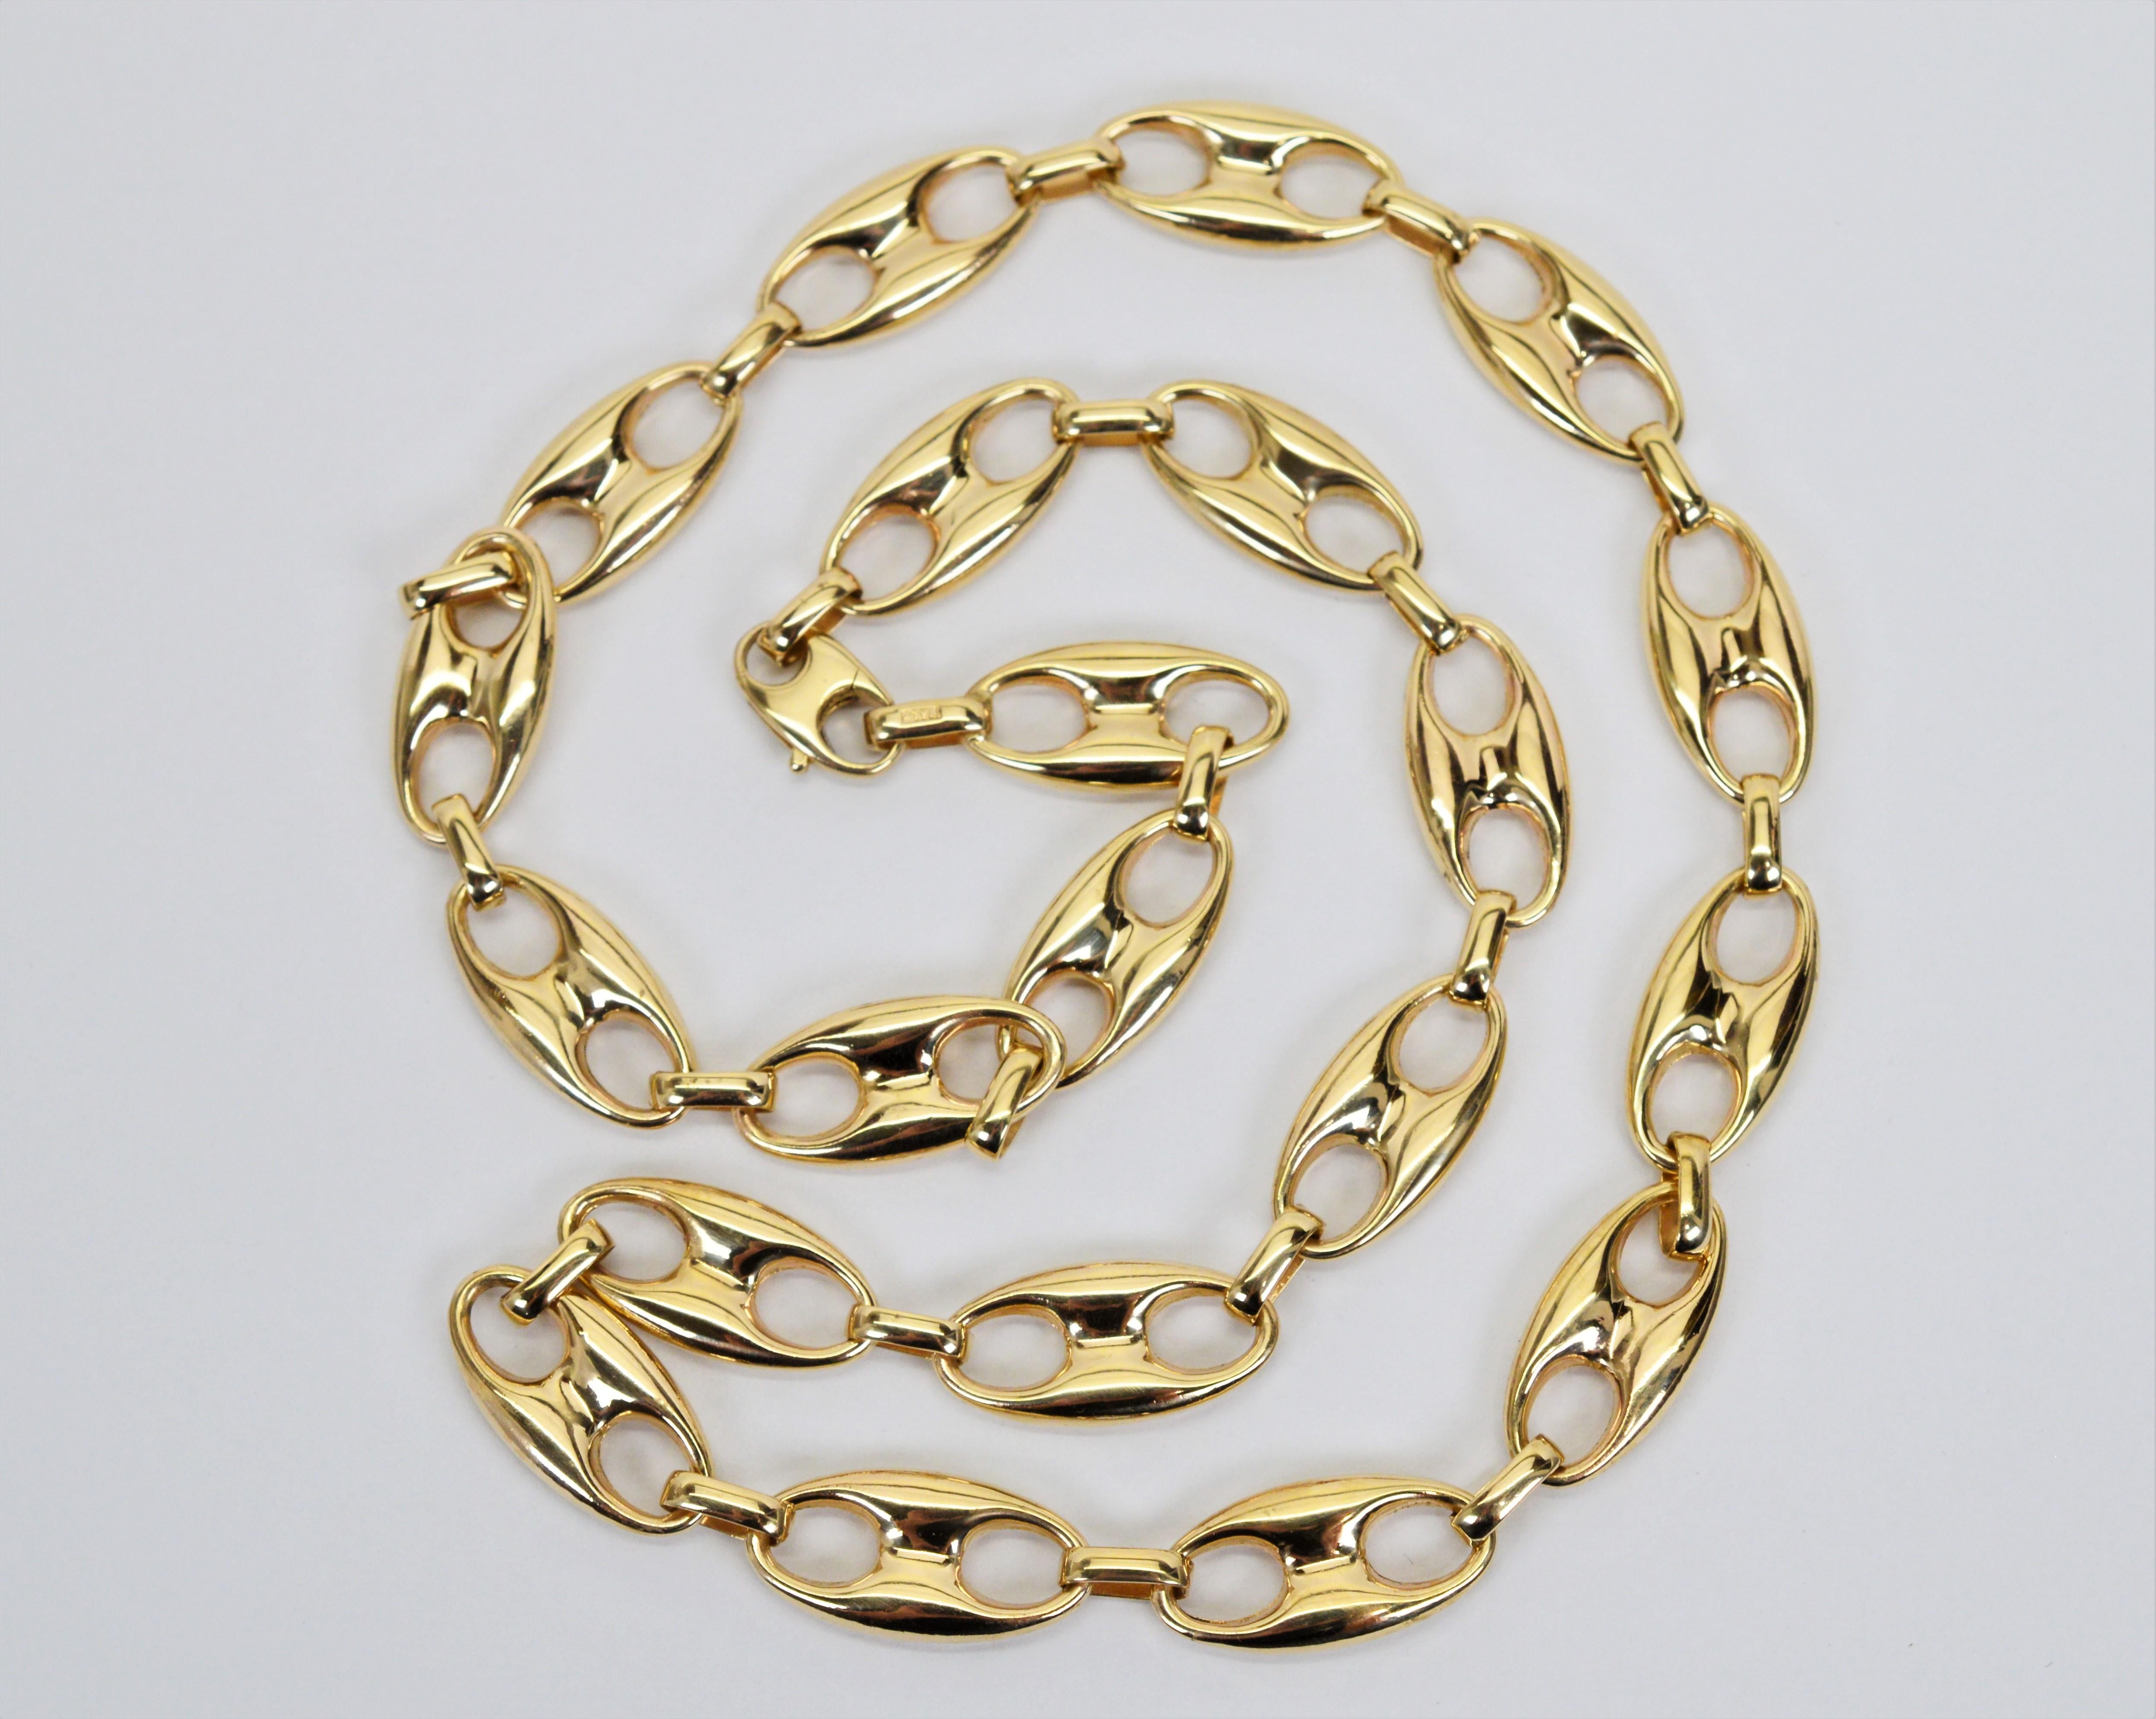 4 pennyweight gold chain